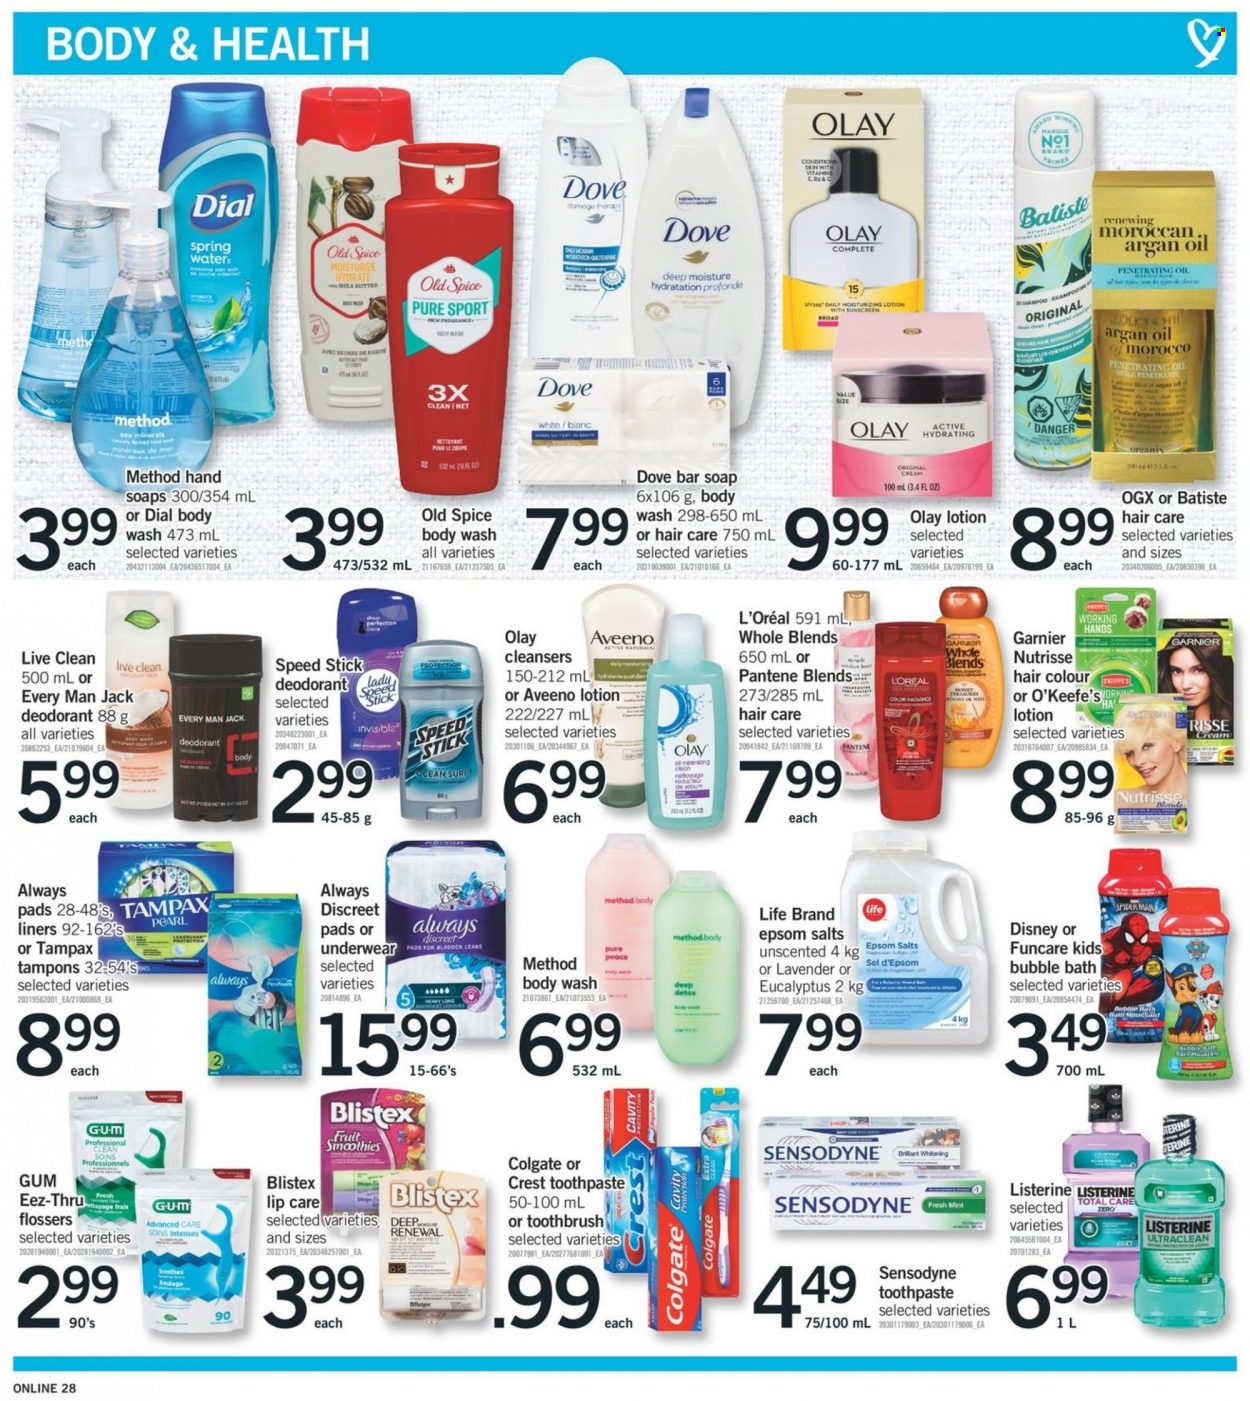 thumbnail - Fortinos Flyer - January 06, 2022 - January 12, 2022 - Sales products - coconut, Disney, spice, honey, Bai, smoothie, spring water, Aveeno, Spiderman, body wash, bubble bath, soap bar, Dial, soap, toothbrush, toothpaste, Crest, Always pads, Always Discreet, tampons, L’Oréal, Olay, OGX, hair color, body lotion, anti-perspirant, Speed Stick, Sure, argan oil, Dove, Colgate, Garnier, Listerine, Tampax, Pantene, Old Spice, Sensodyne, deodorant. Page 27.